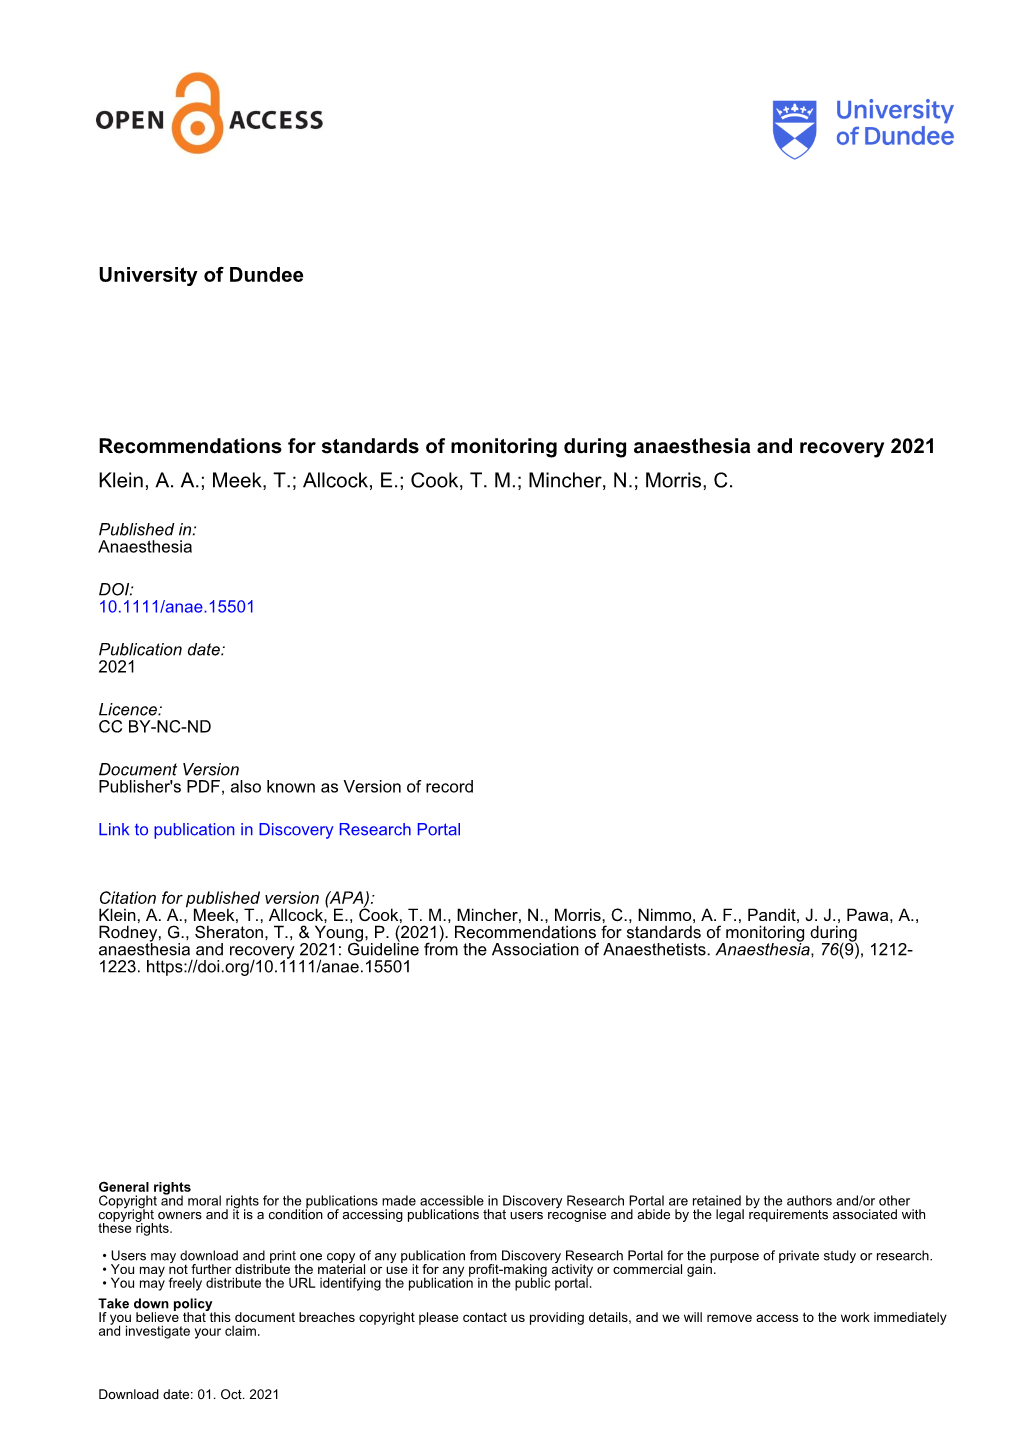 Recommendations for Standards of Monitoring During Anaesthesia and Recovery 2021 Klein, A